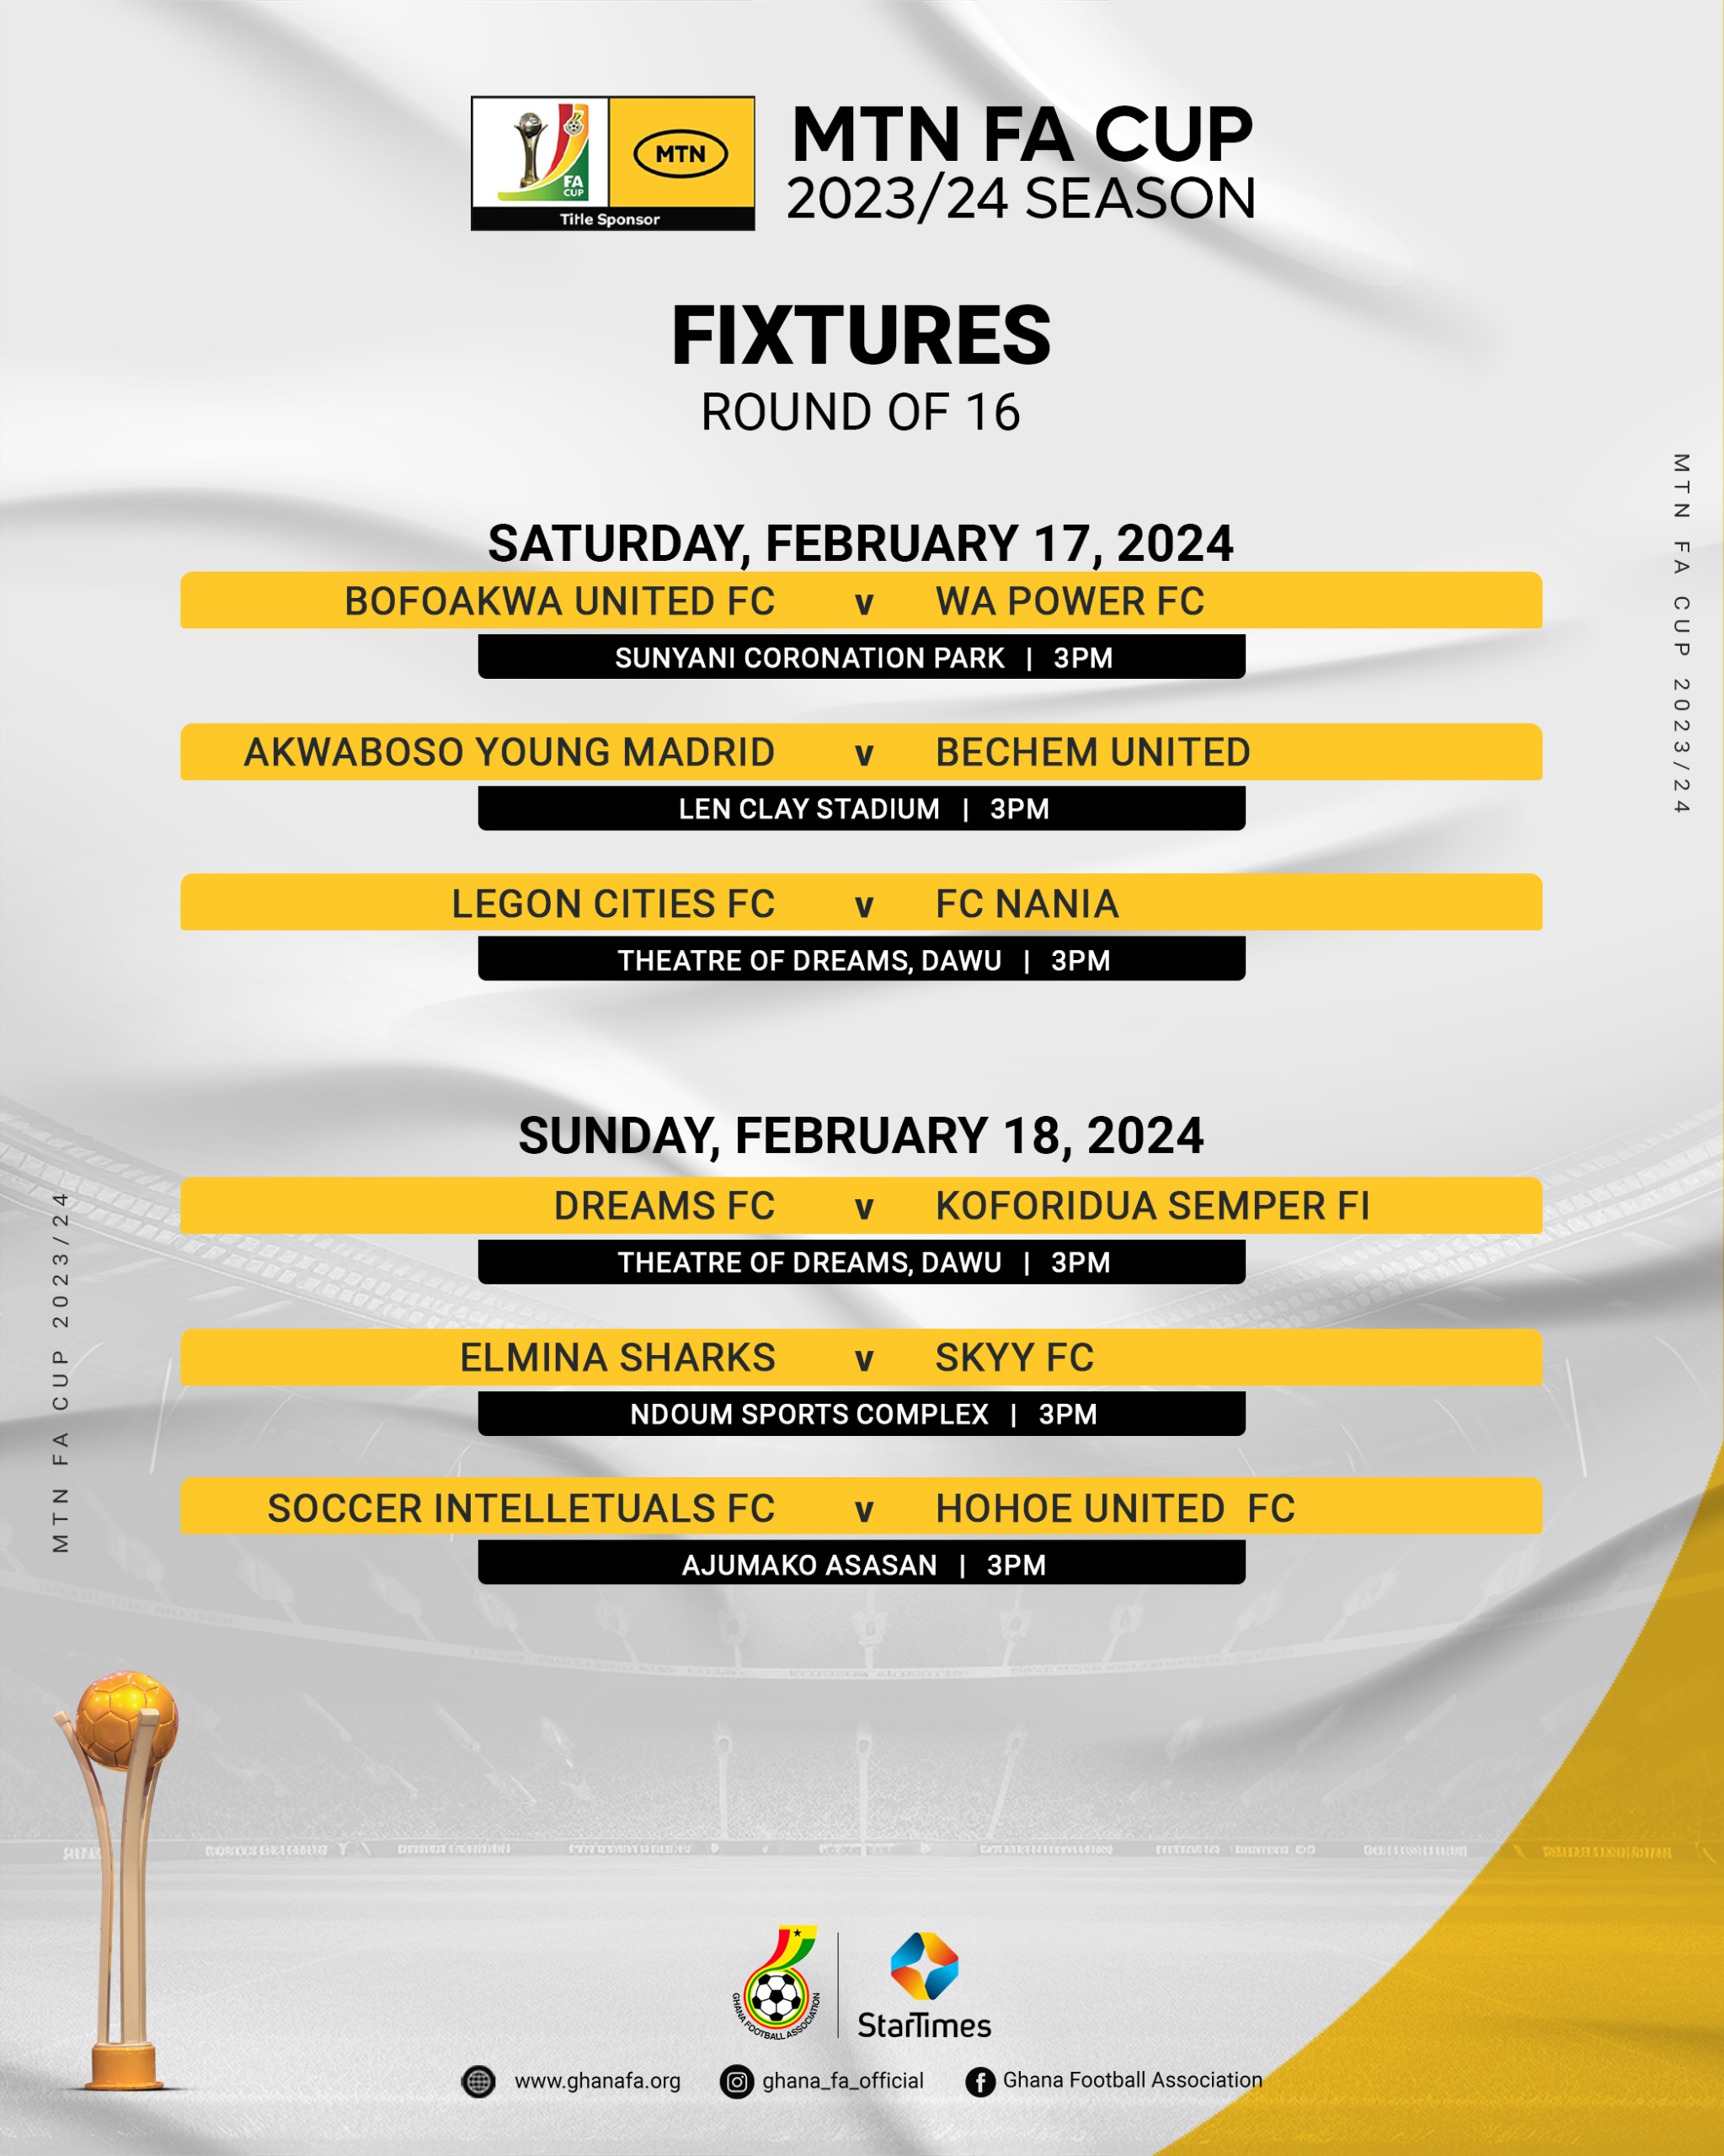 Match Officials for MTN FA Cup Round of 16 games